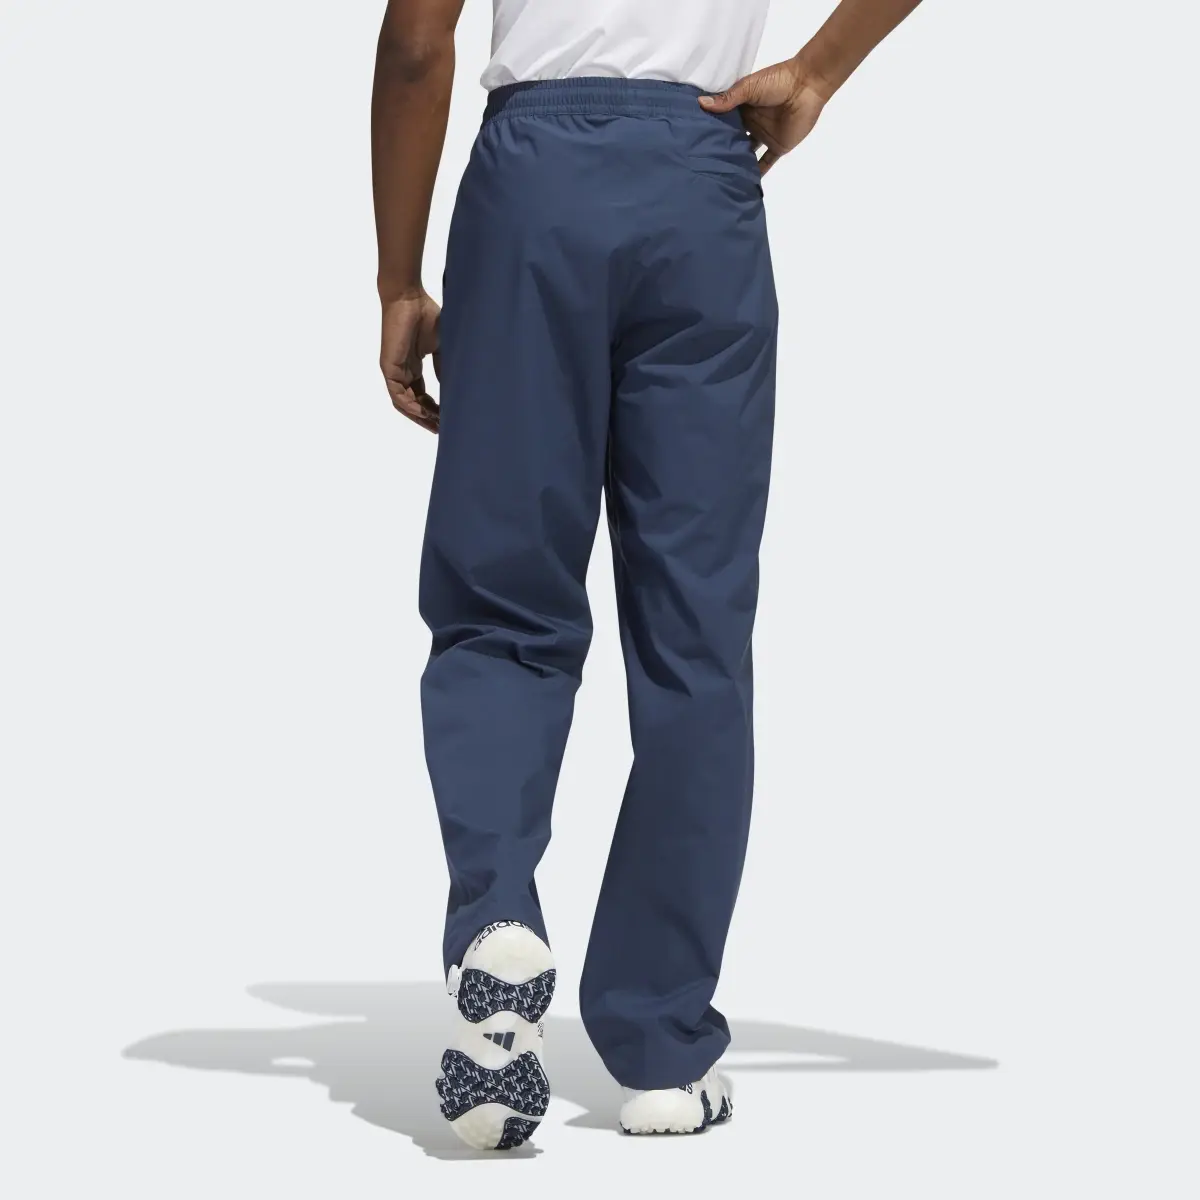 Adidas Provisional Golf Tracksuit Bottoms. 2